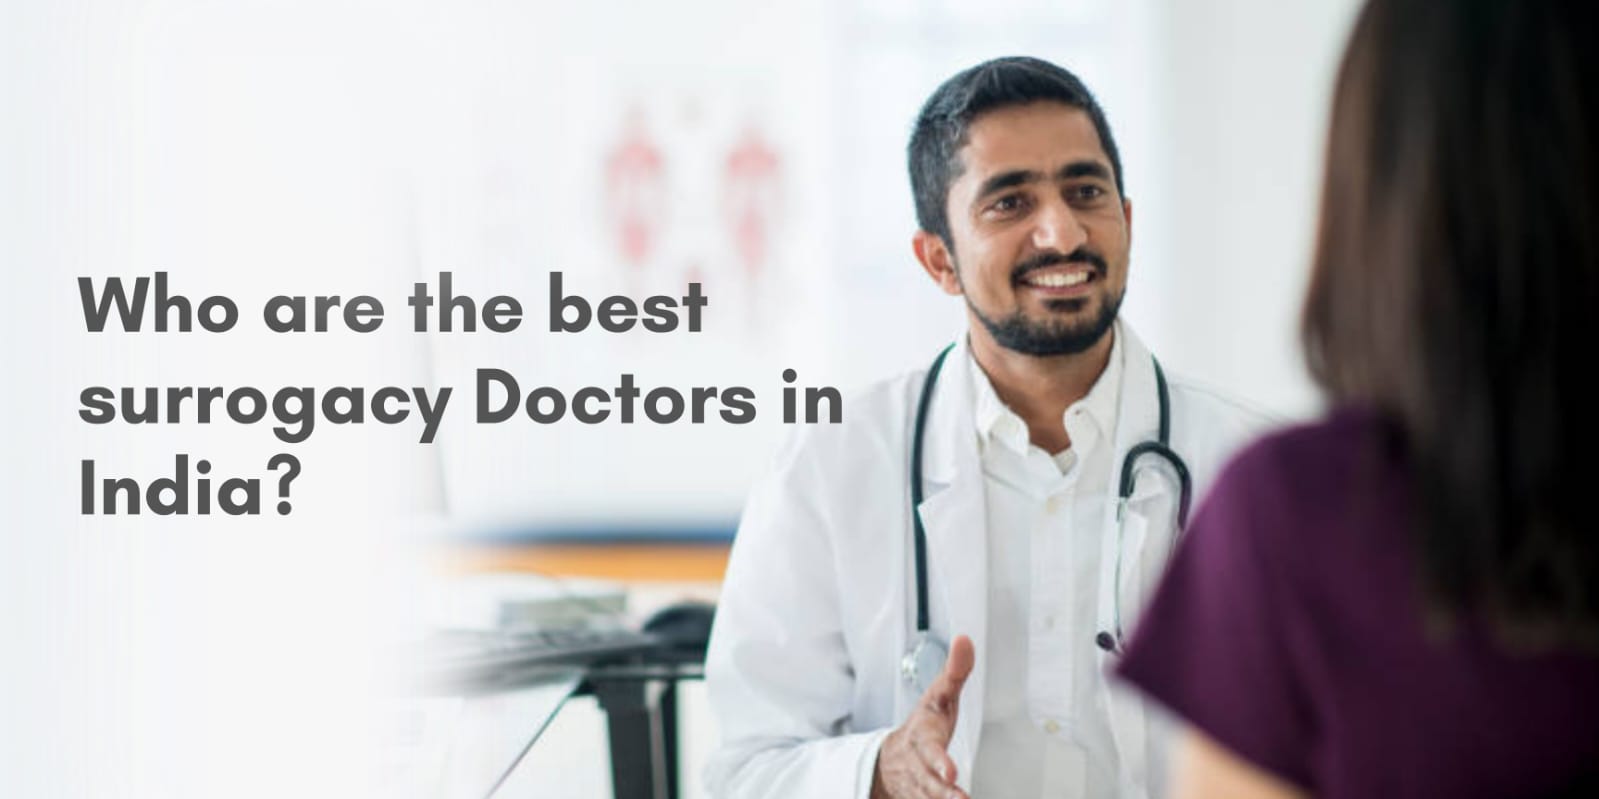 Who are the best surrogacy Doctors in India?